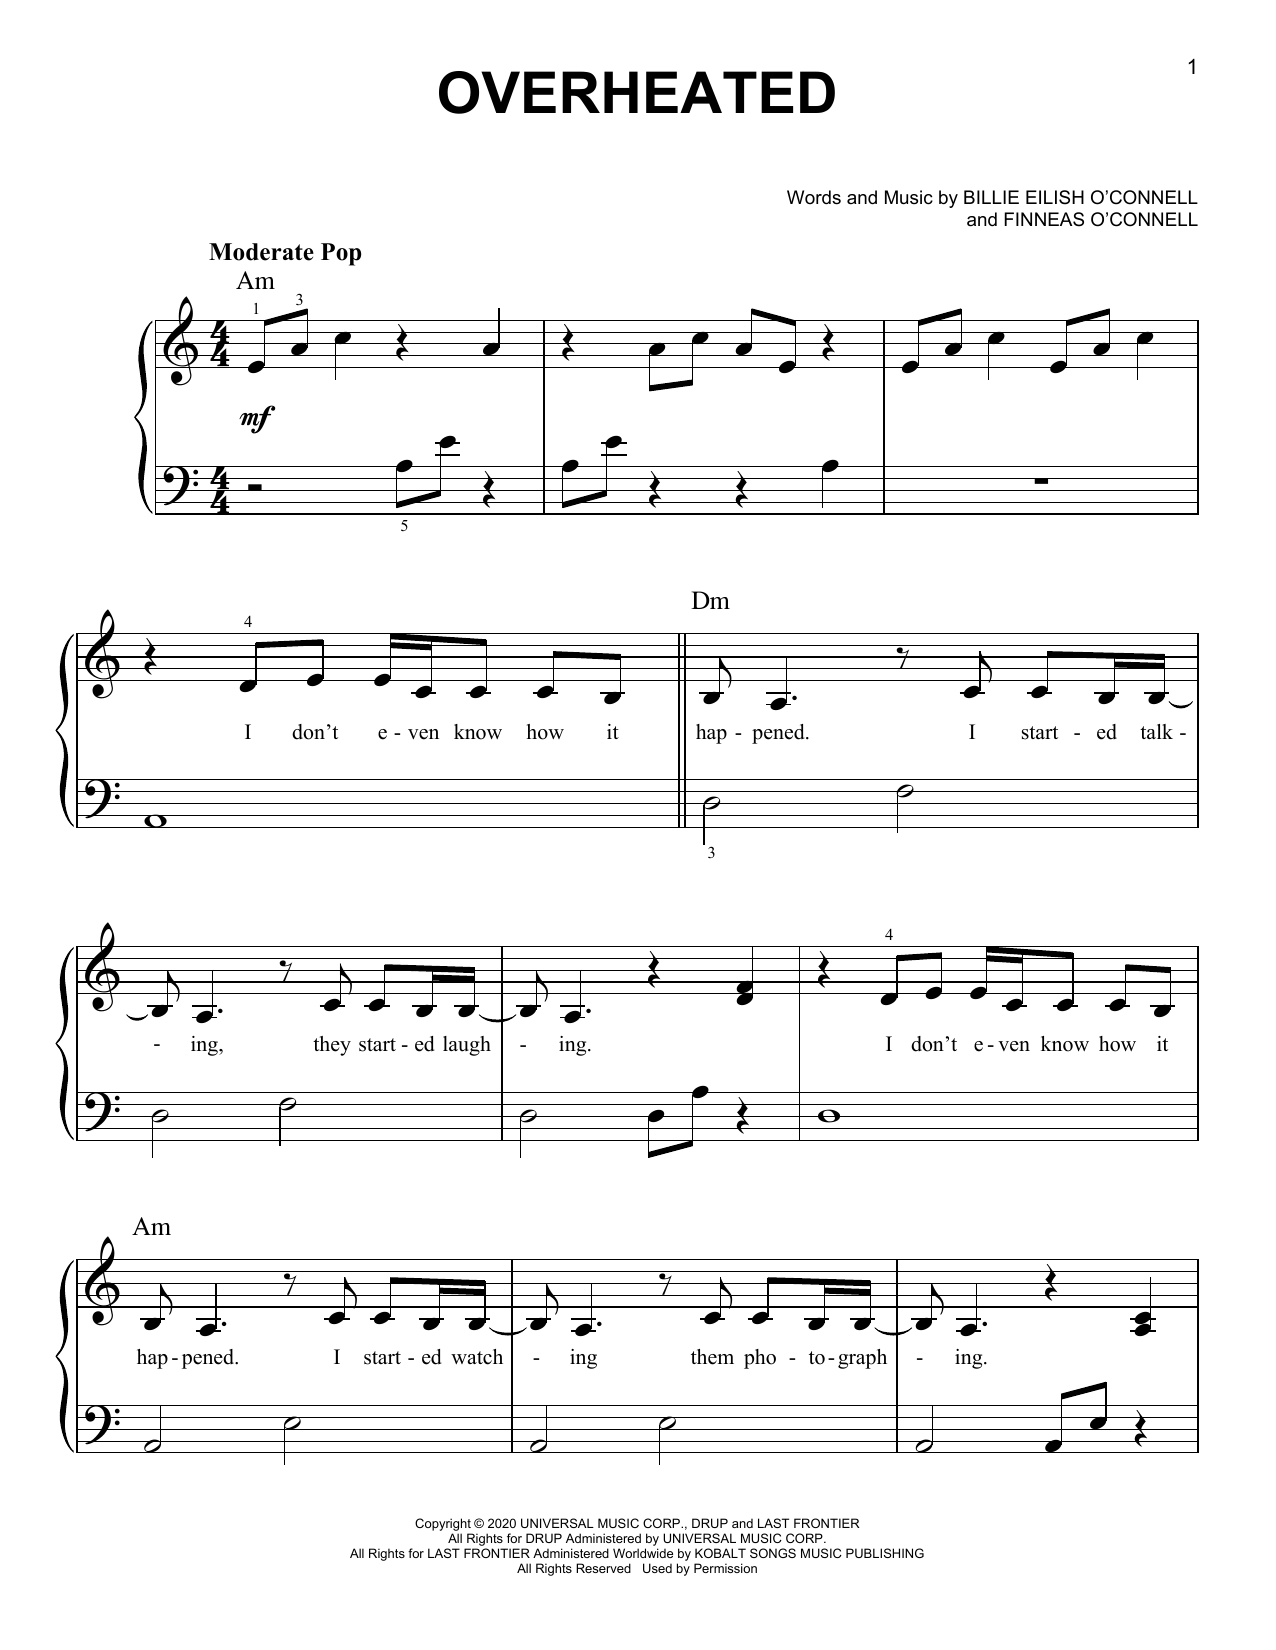 Download Billie Eilish OverHeated sheet music and printable PDF score & Alternative music notes